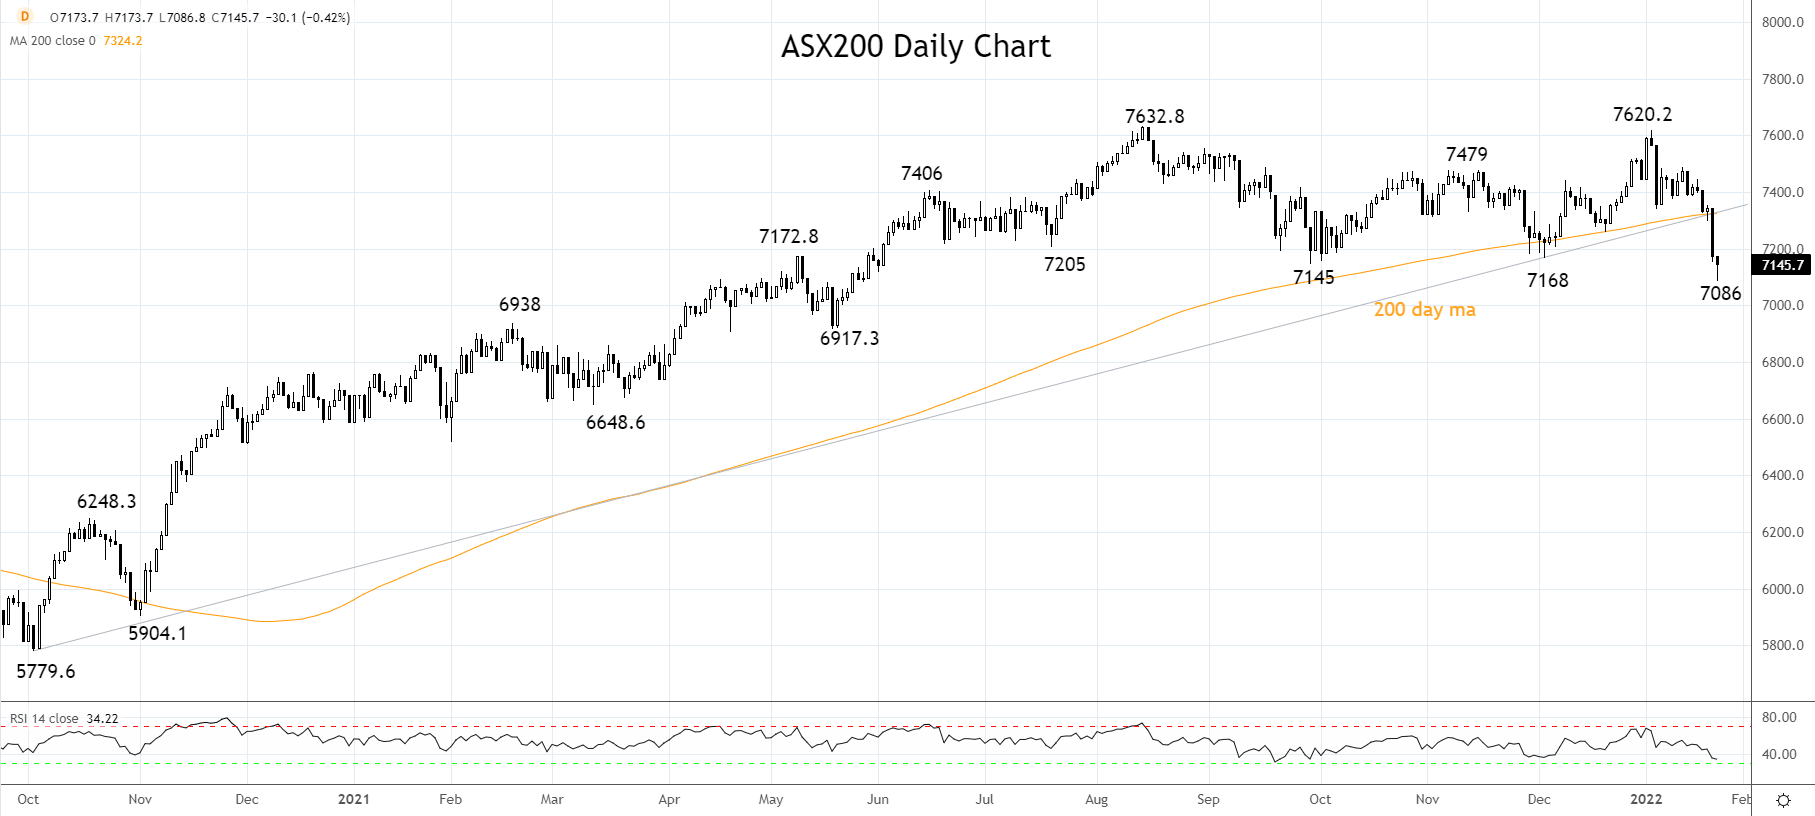 ASX200 daily chart 24th of Jan